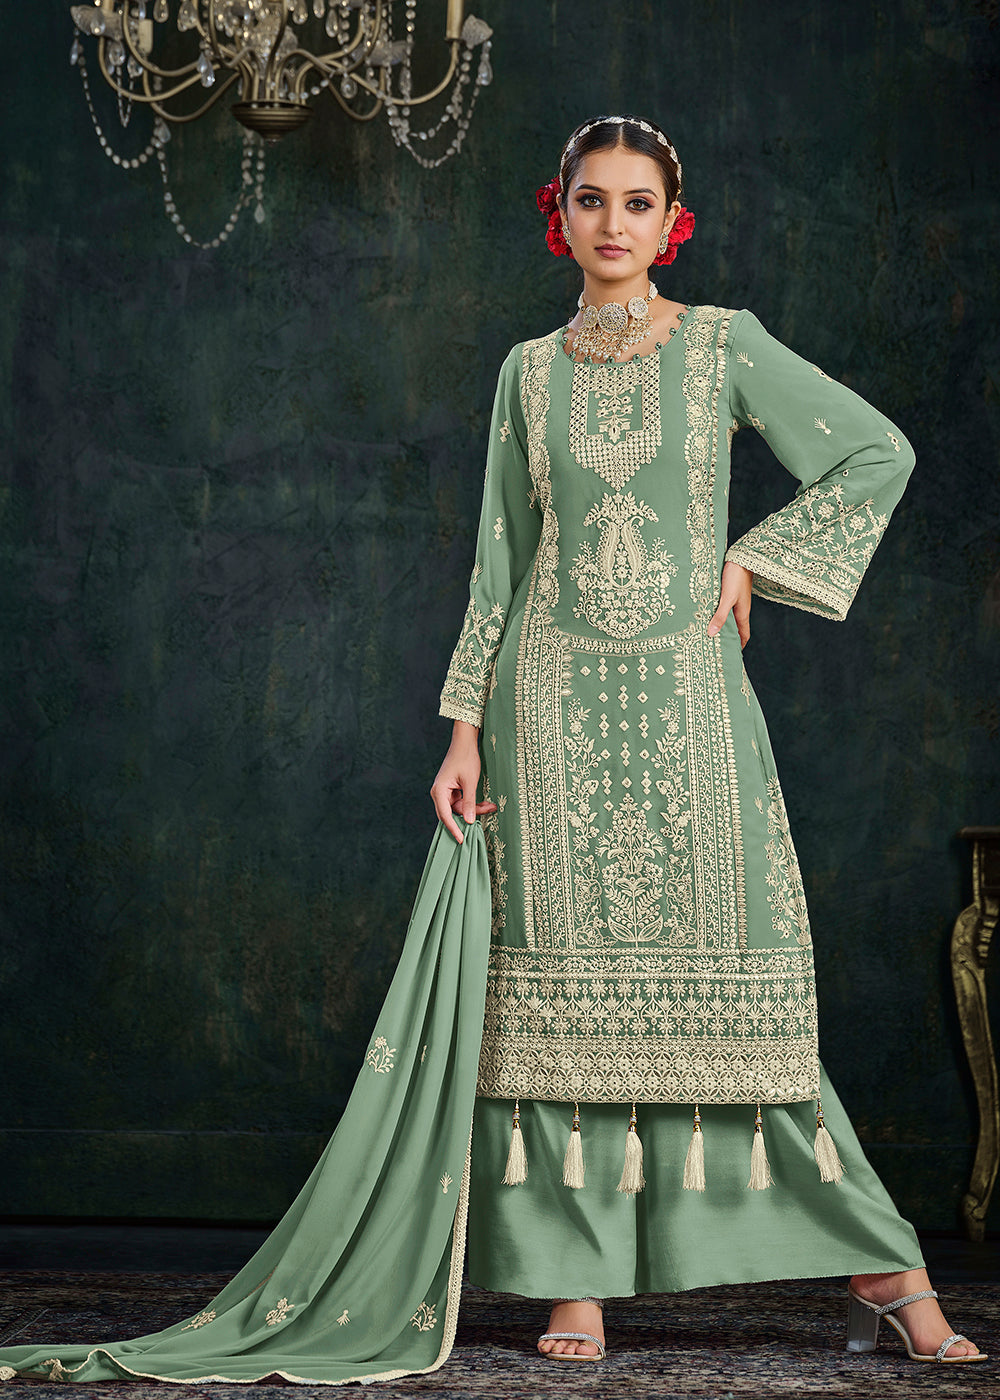 Buy Now Ethereal Green Foil Mirror Embroidered Palazzo Salwar Suit Online in USA, UK, Canada, Germany, Australia & Worldwide at Empress Clothing. 